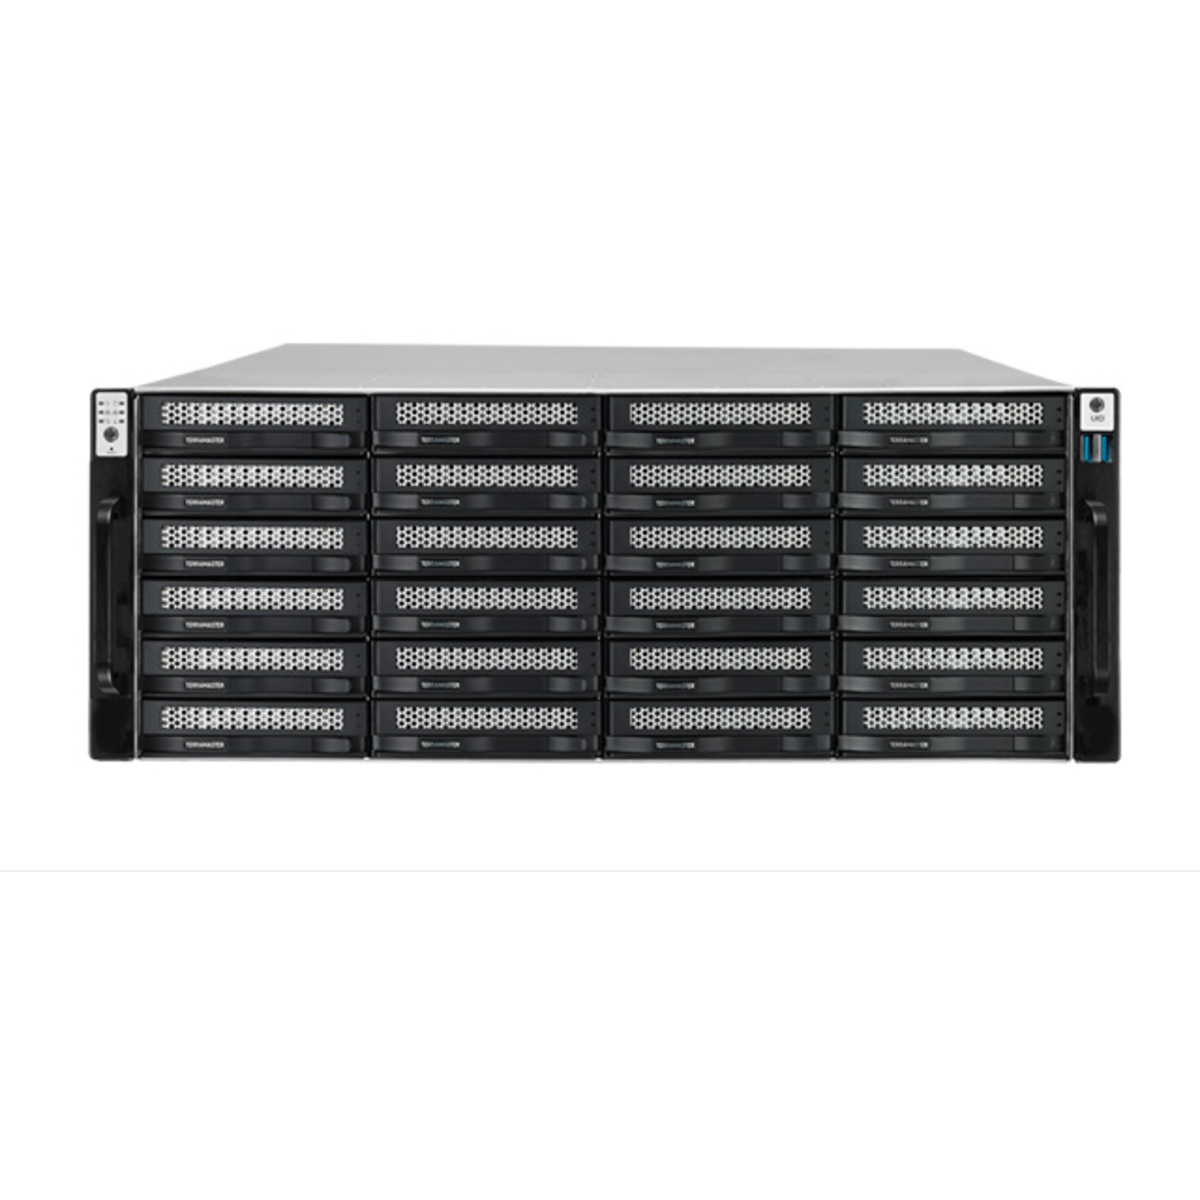 TerraMaster U24-722-2224 396tb 24-Bay RackMount Large Business / Enterprise NAS - Network Attached Storage Device 22x18tb Seagate EXOS X18 ST18000NM000J 3.5 7200rpm SATA 6Gb/s HDD ENTERPRISE Class Drives Installed - Burn-In Tested U24-722-2224